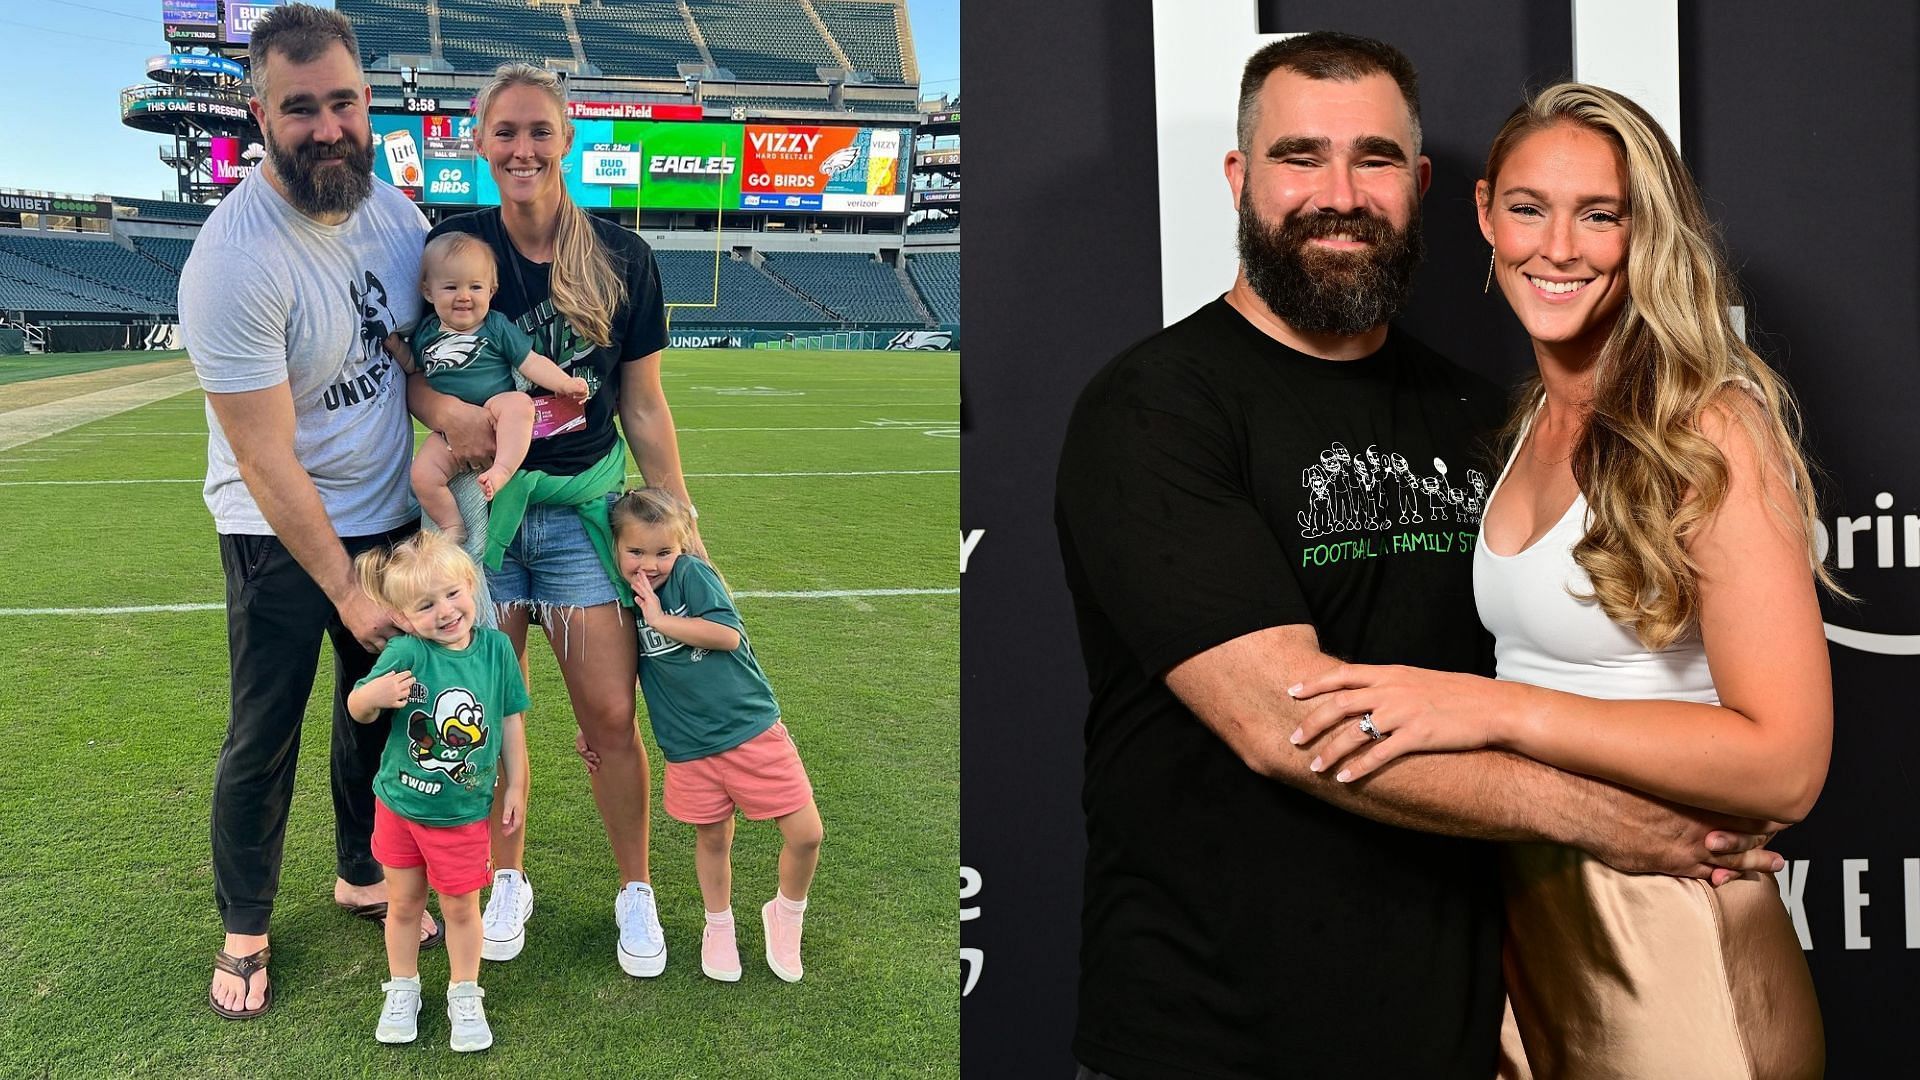 Kylie Kelce shares adorable pictures of her family on game-day.